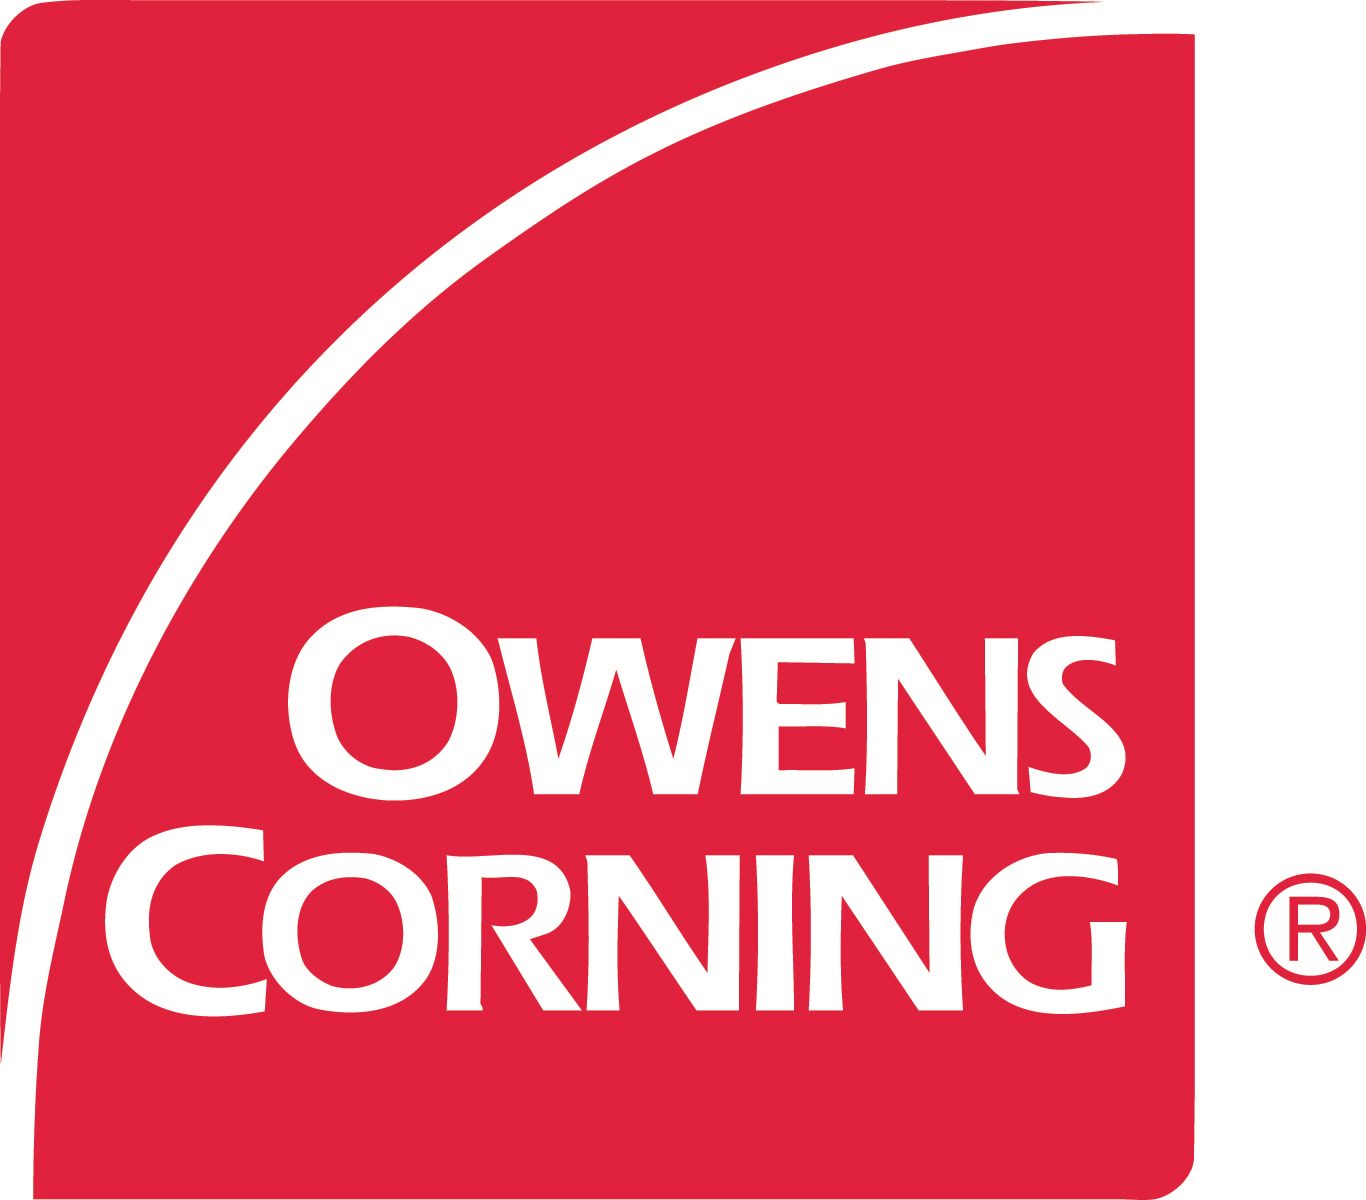 The Owens Corning logo is red and white